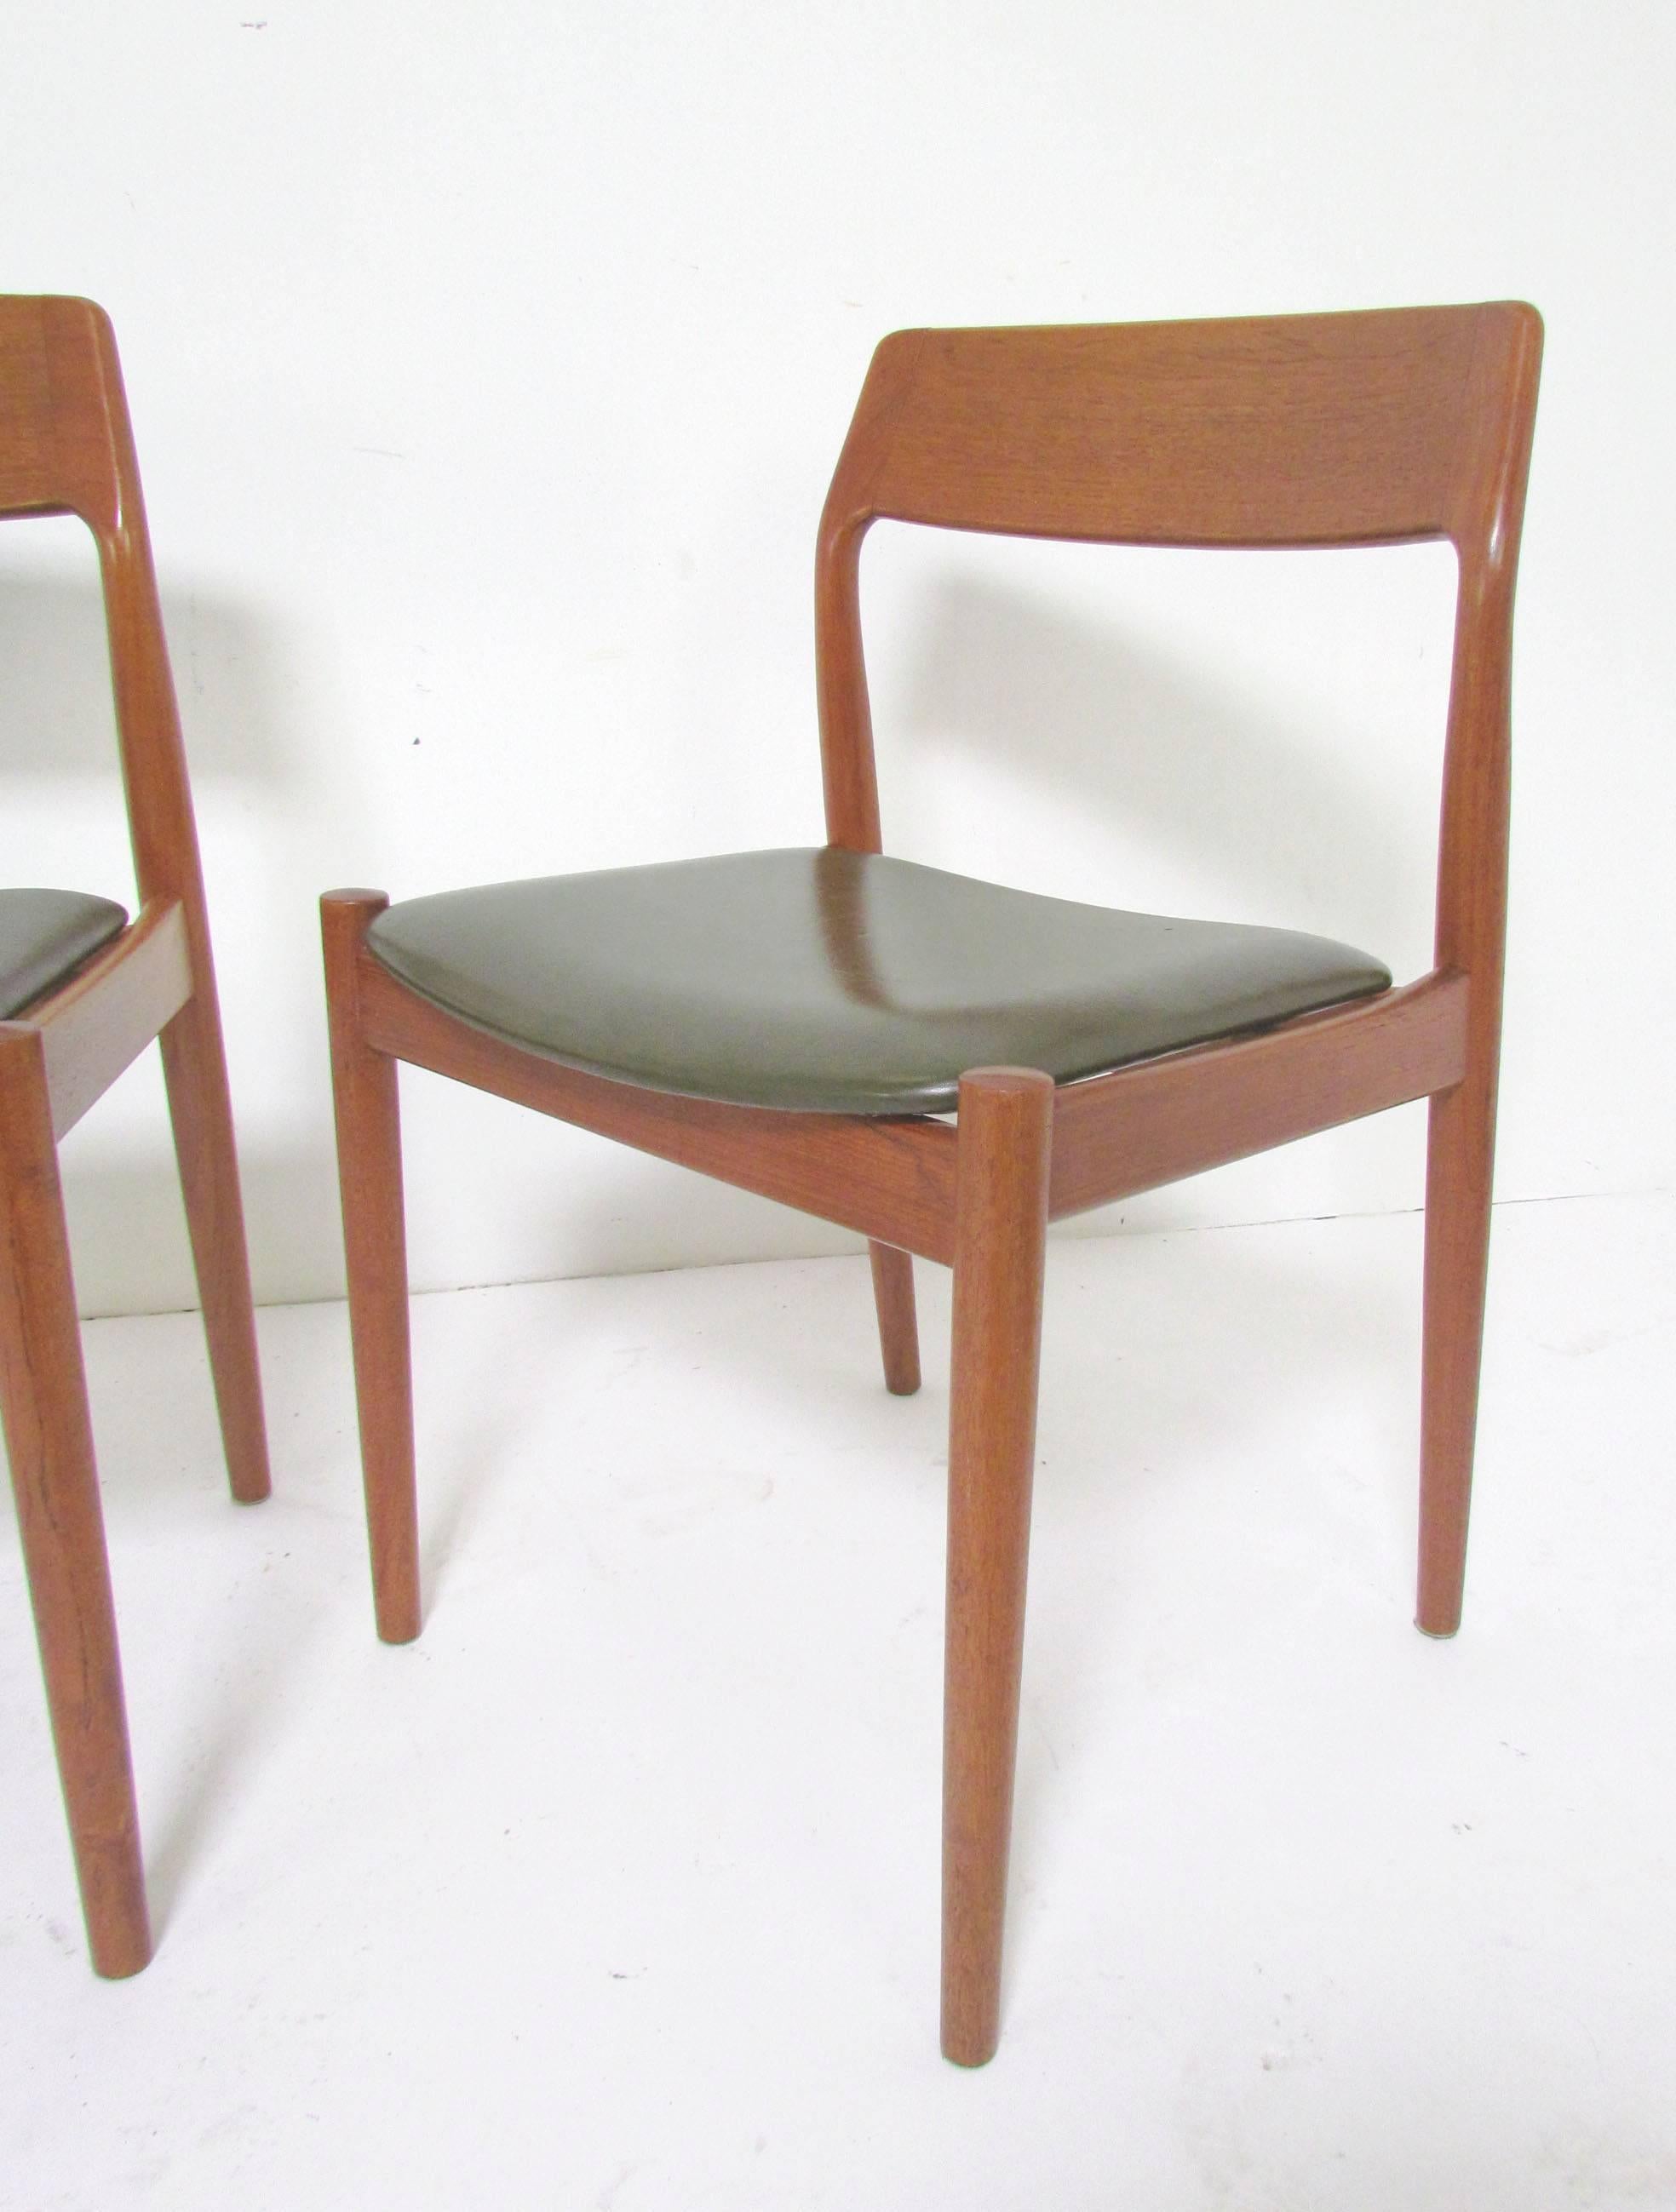 Set of six teak dining chairs with carved backs, in the manner of Niels Moller, by Scantic Mobelvaerk made in Denmark, circa 1960s.